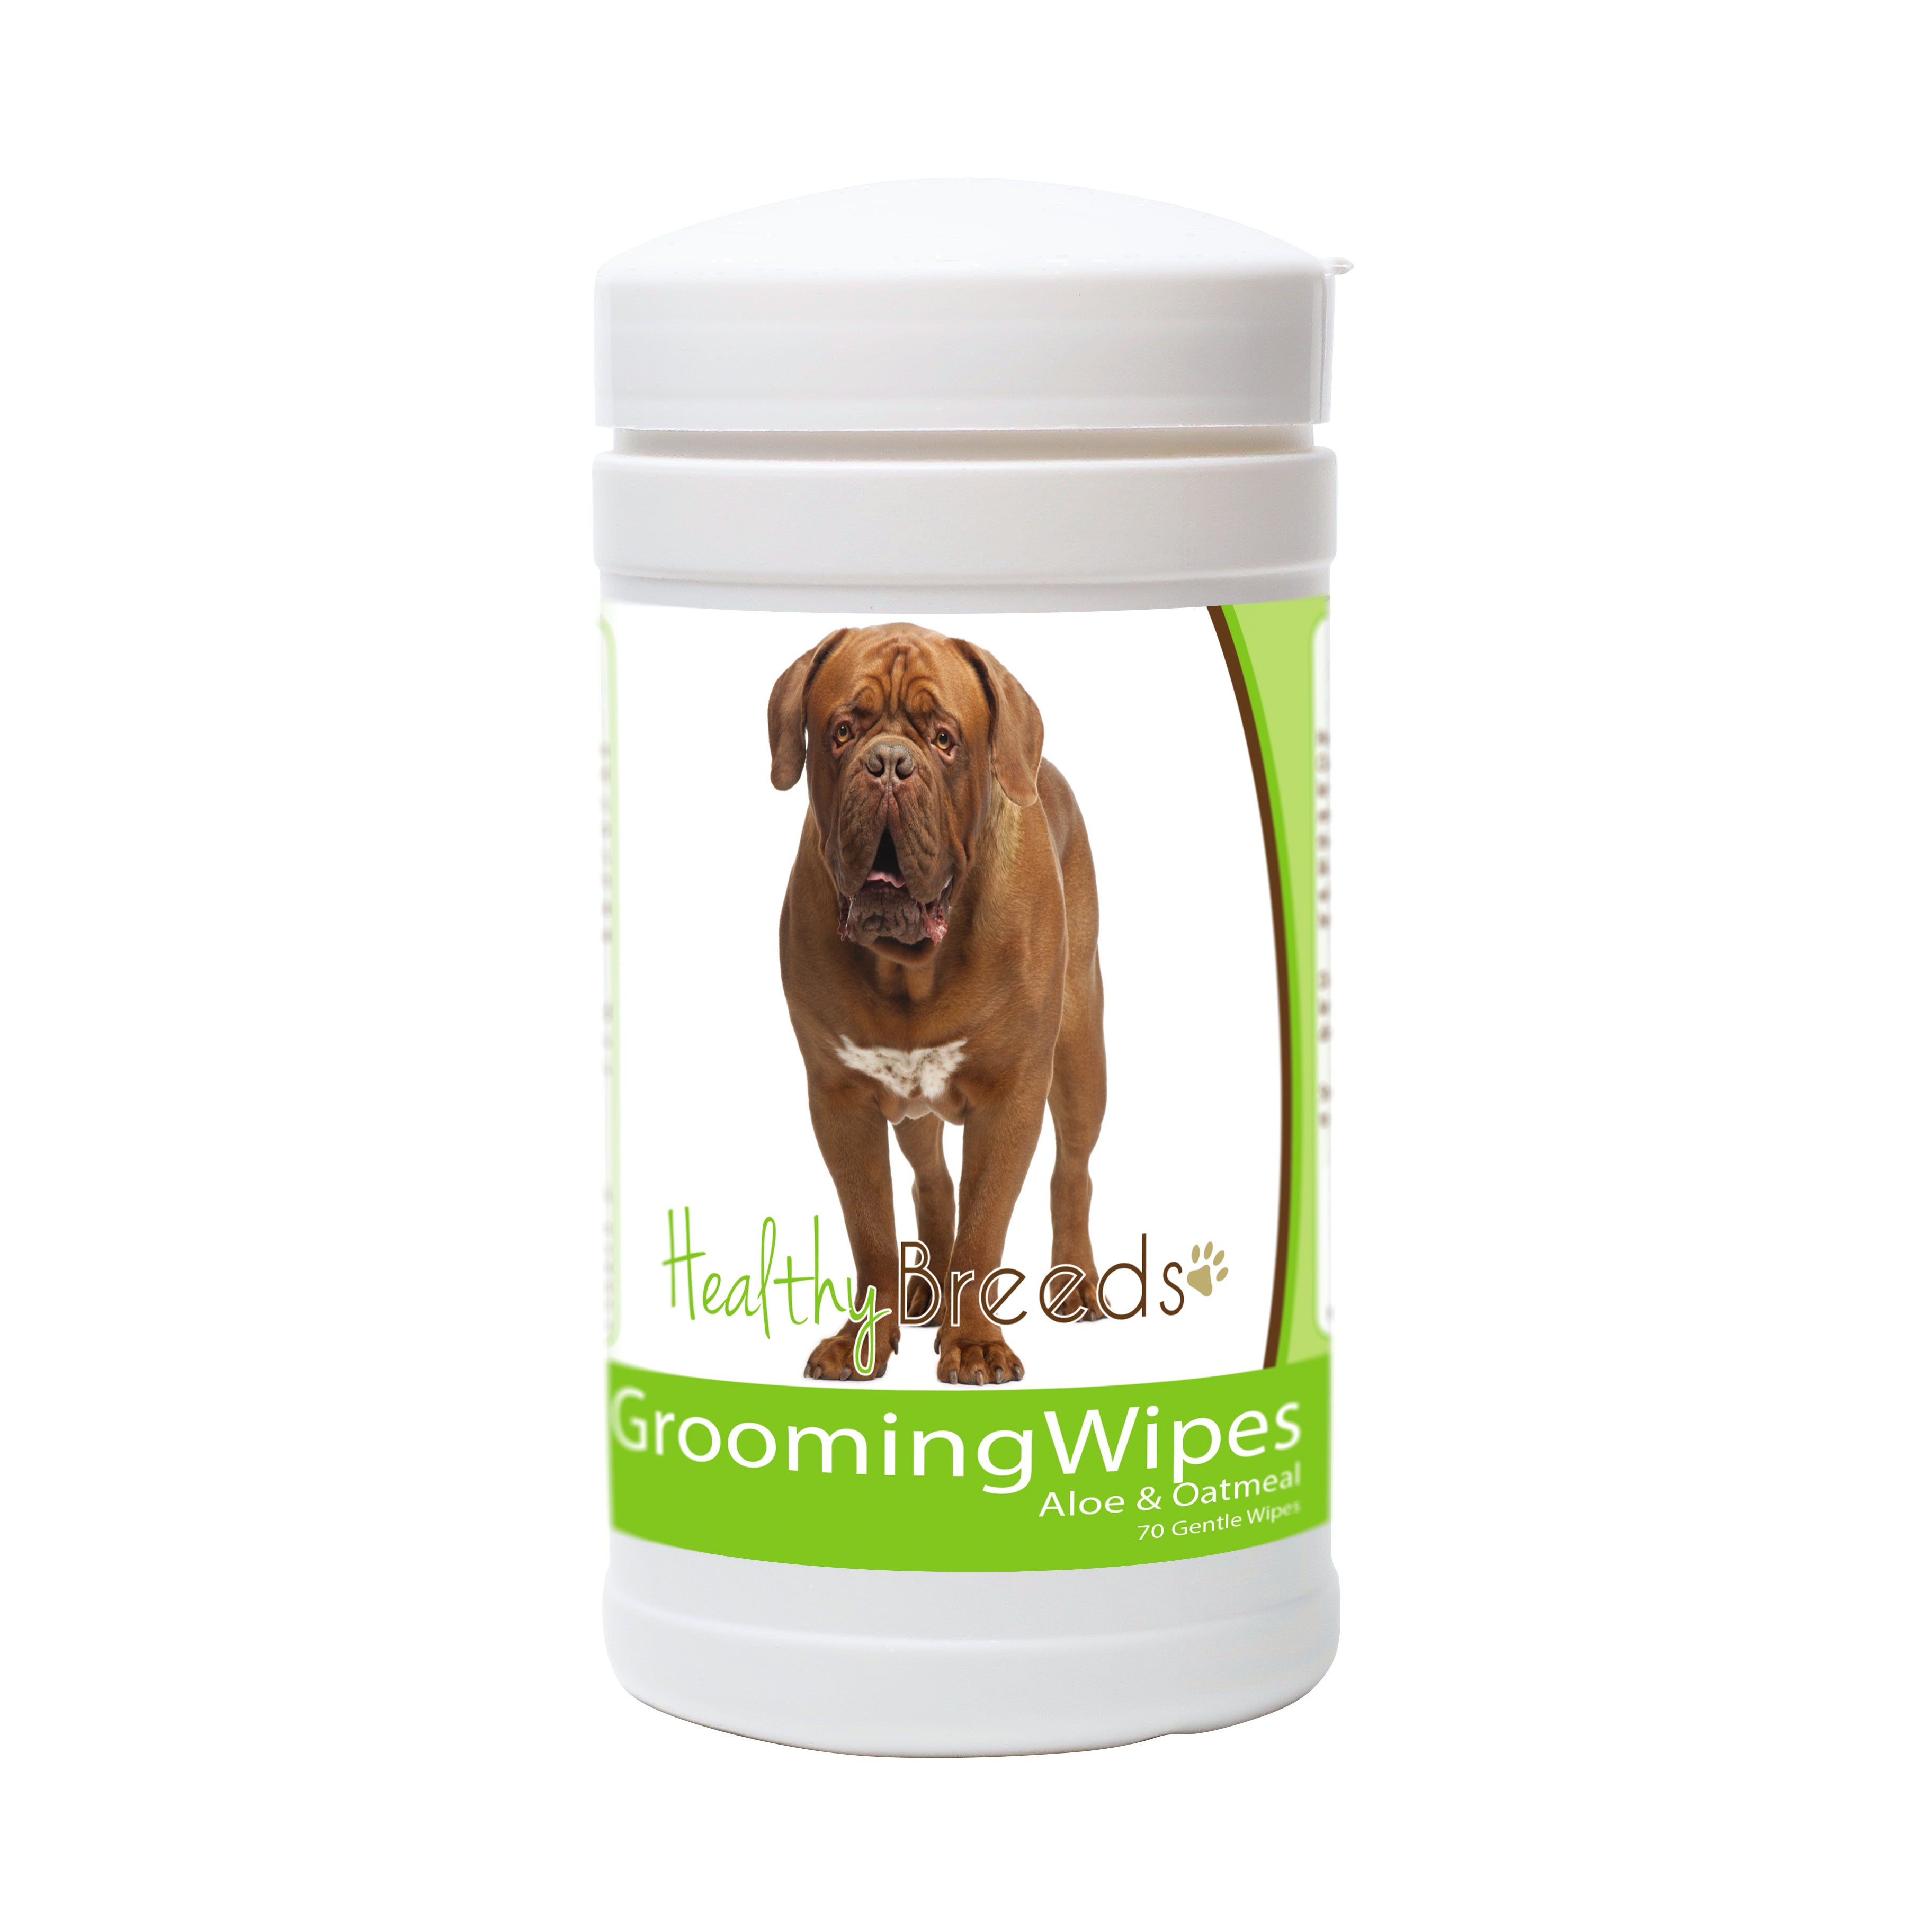 Dogue de Bordeaux Grooming Wipes 70 Count